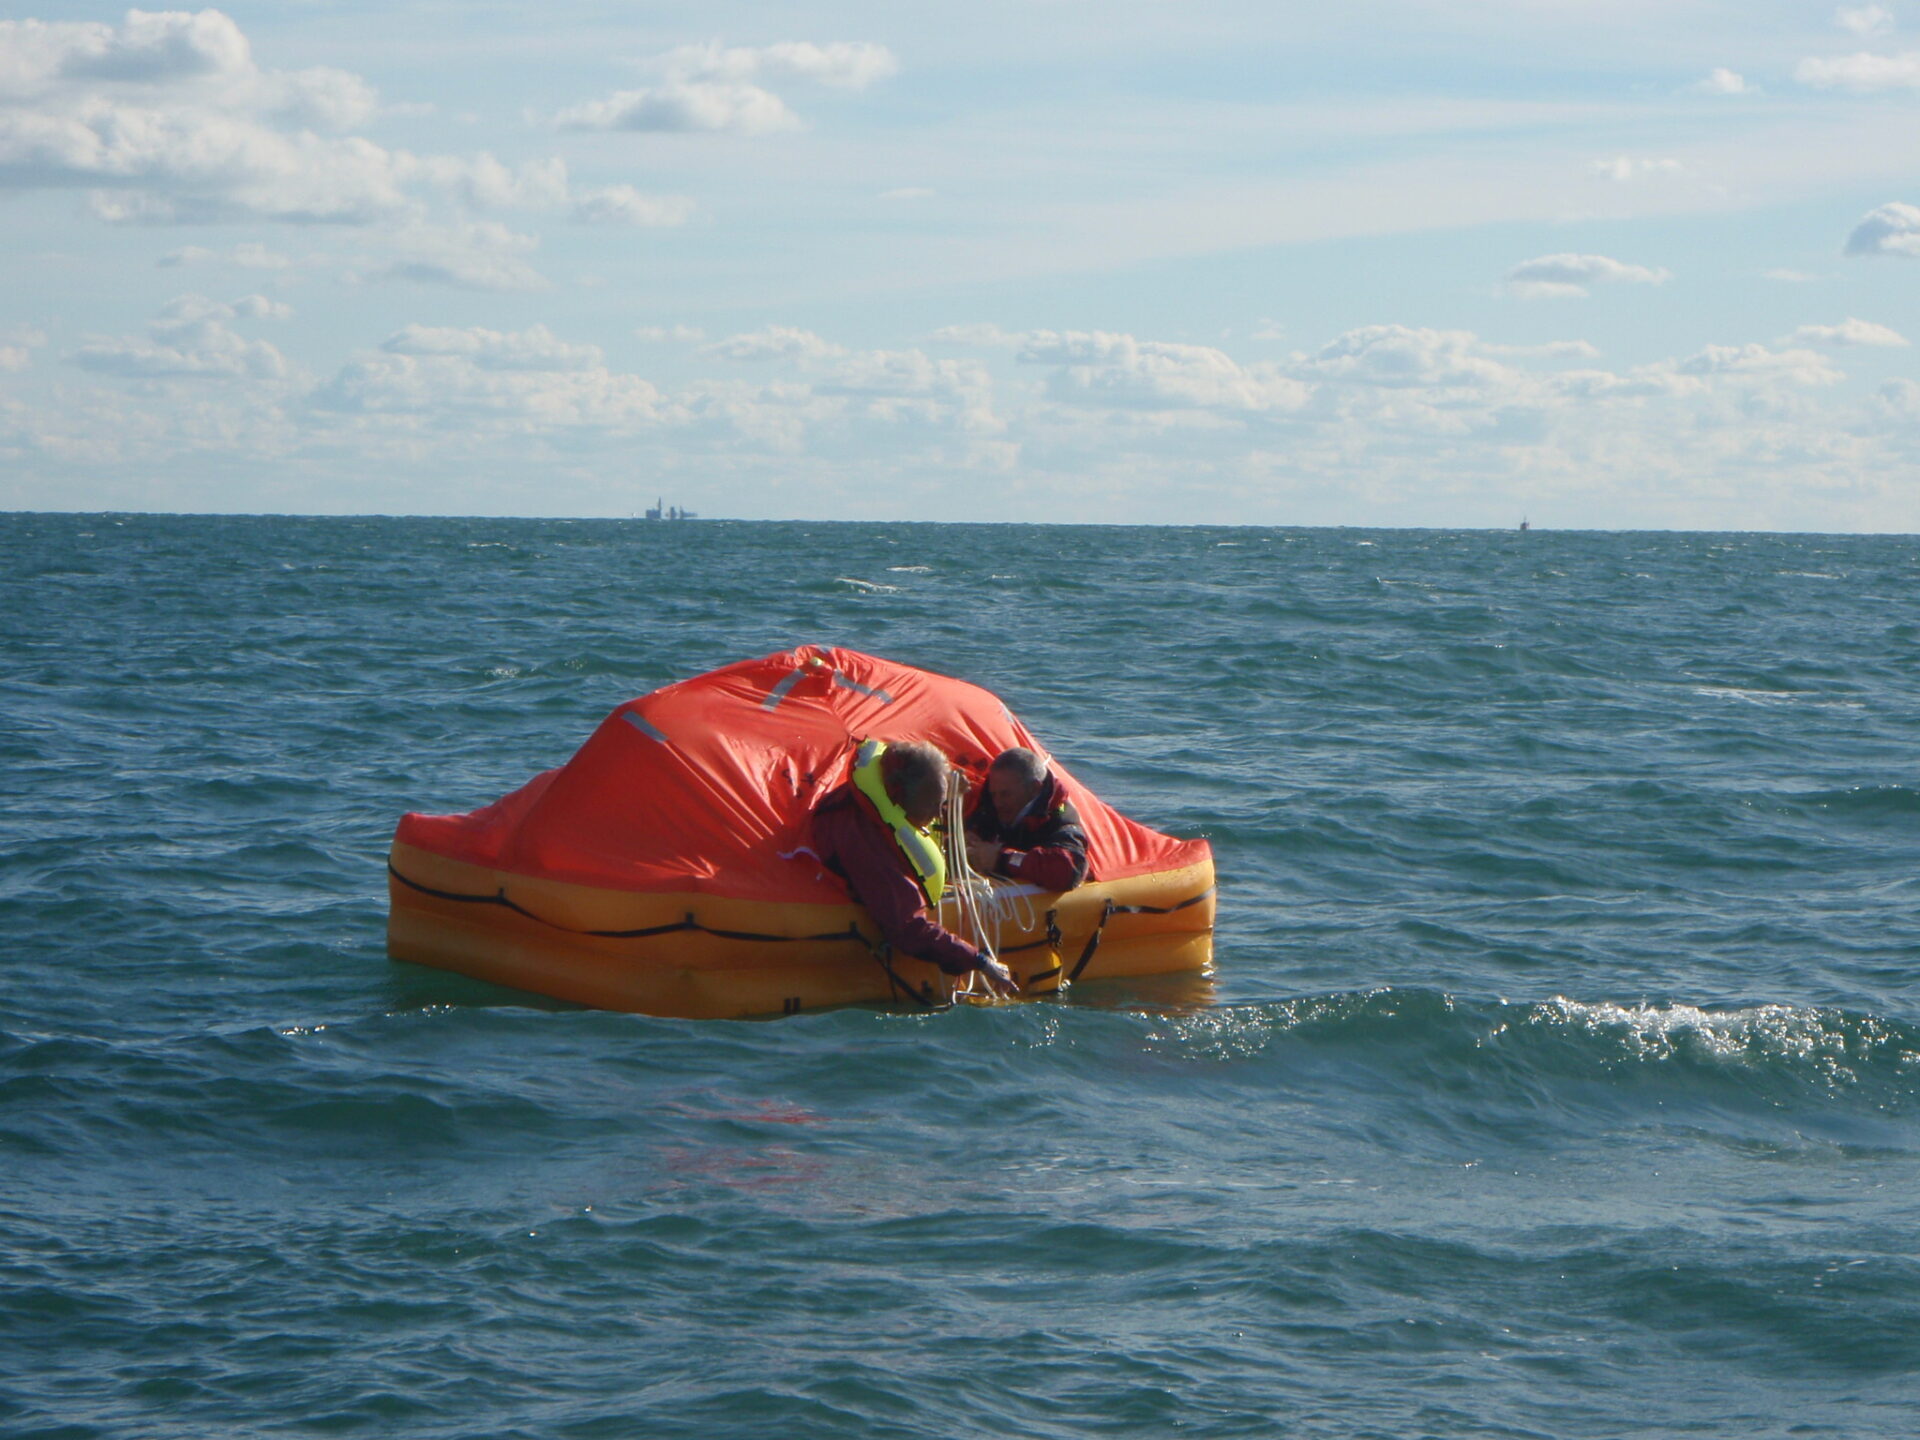 liferaft inflation systems